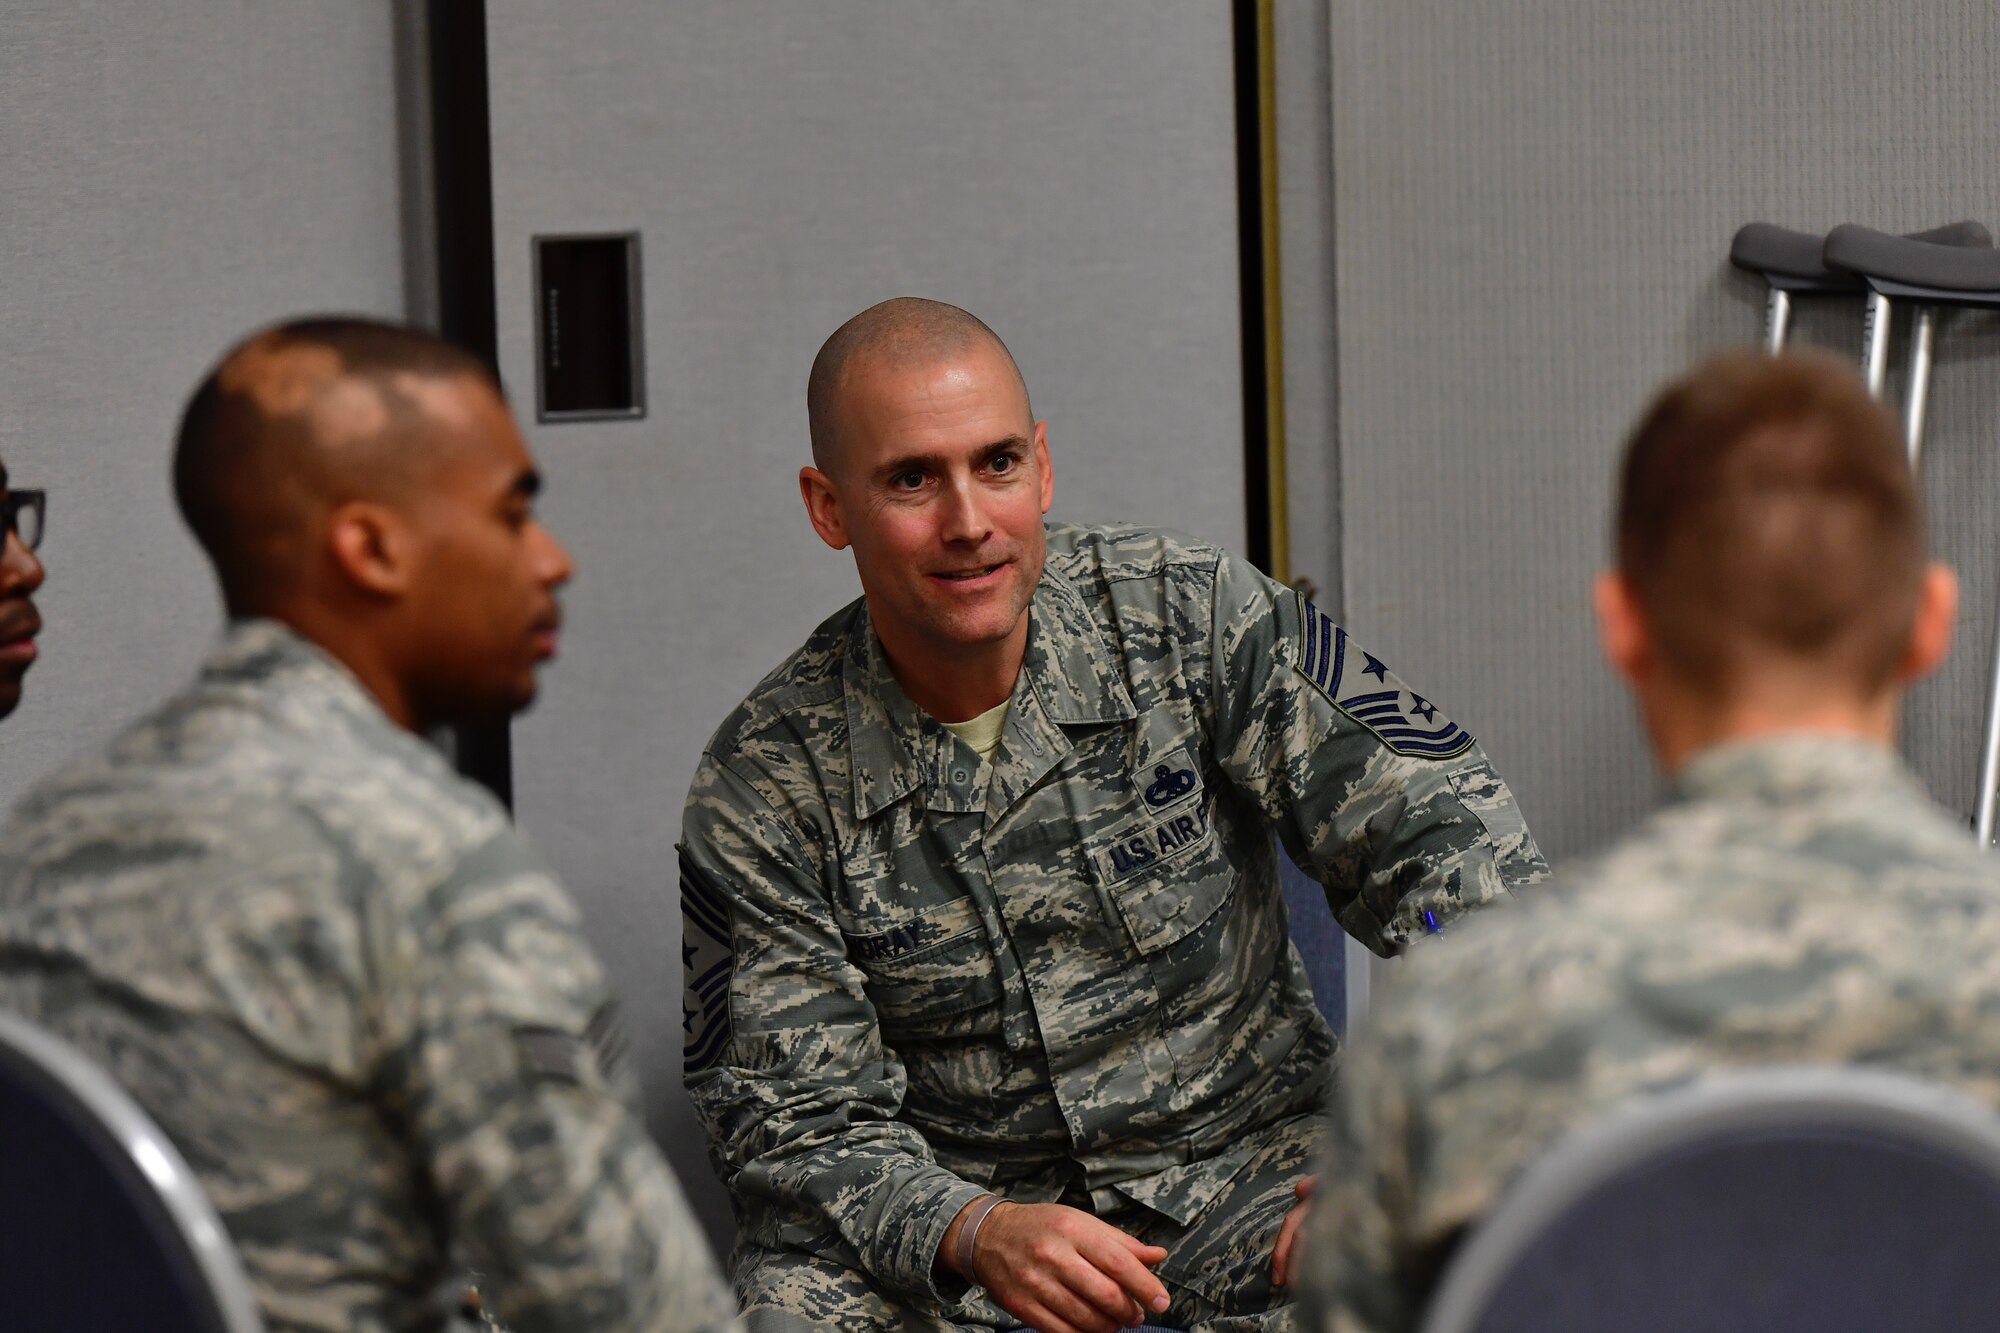 Senior Airman Jonathan Keith, 166th Logistics Readiness Squadron air transportation journeyman, listens to a senior leader at the first Delaware Air National Guard Speed Mentoring Event, Dec. 1, 2018 at New Castle Air National Guard Base, Delaware. During this event, Airmen were granted opportunities to partake in two-way communication with senior leaders about various topics. (U.S. Air National Guard photo by Staff Sgt. John Michaels)